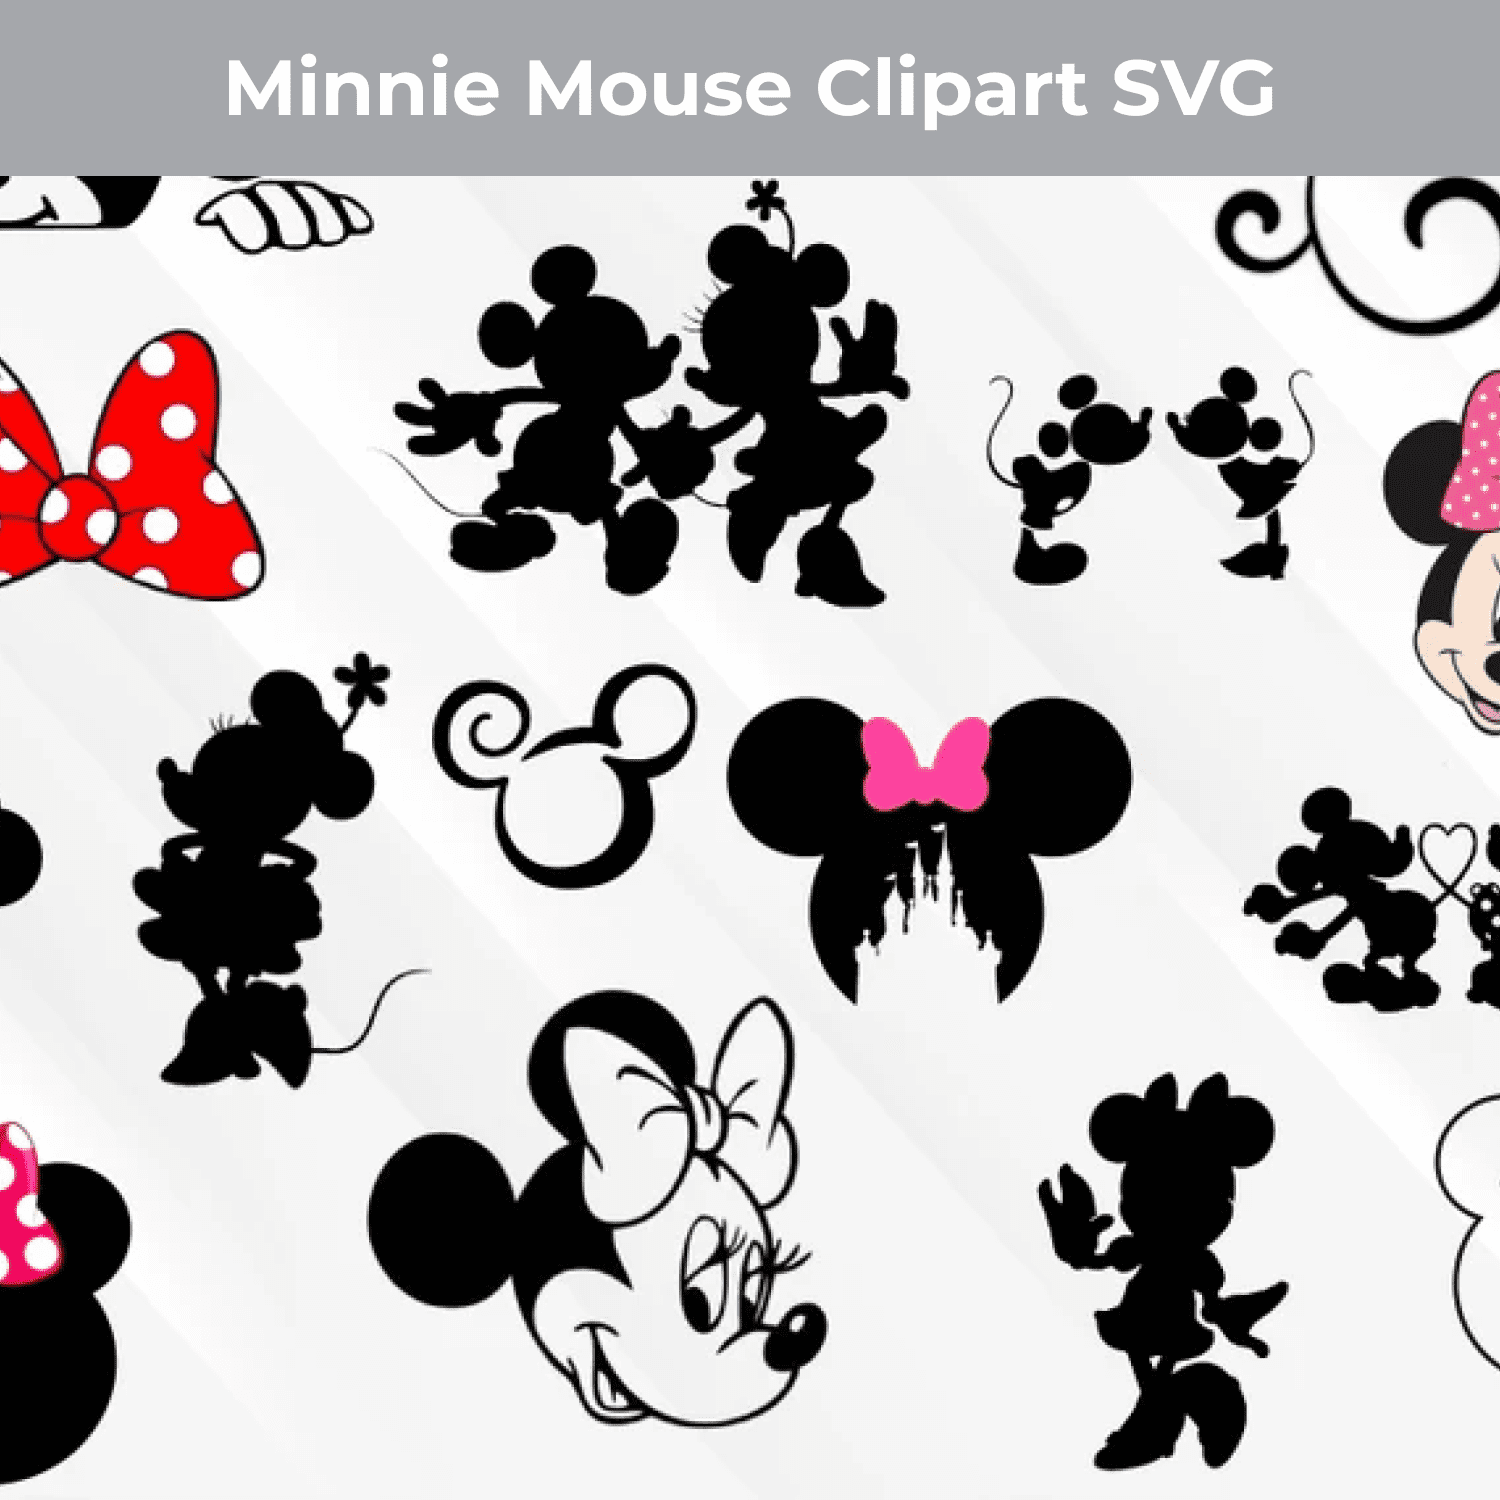 Minnie Mouse Clipart SVG Digital Download cover.